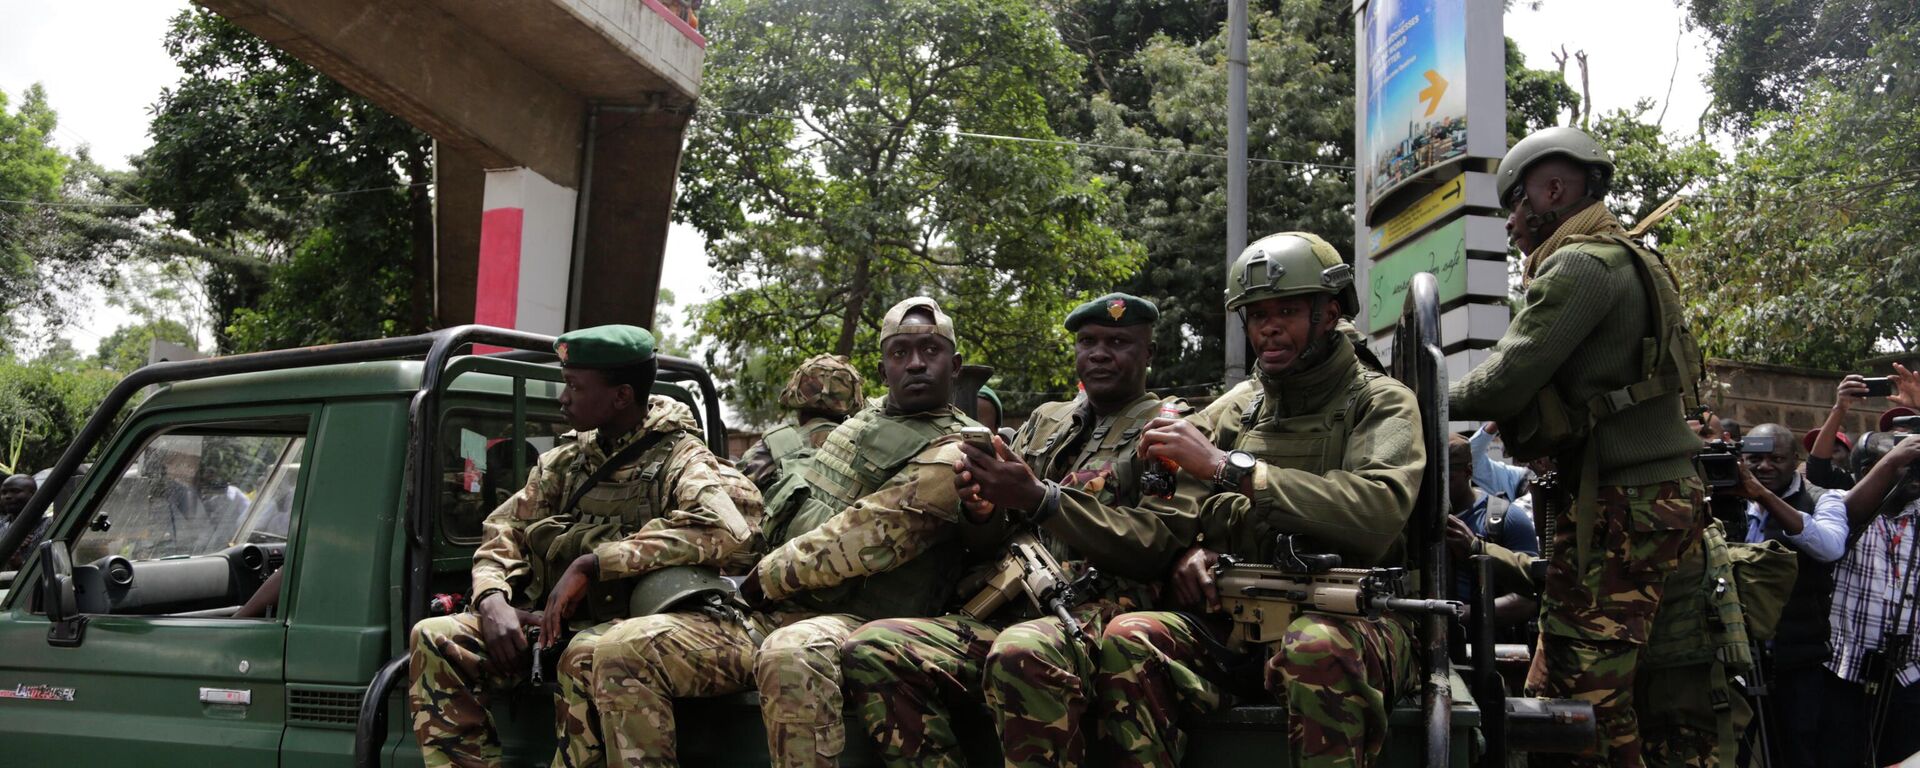 Members of Kenyan special forces at the scene of an attach by an extremist gunman Wednesday, Jan. 16, 2019 in Nairobi, Kenya.  Extremists stormed a luxury hotel in Kenya's capital on Tuesday, setting off thunderous explosions and gunning down people at cafe tables in an attack claimed by Africa's deadliest Islamic militant group.(AP Photo/Khalil Senosi) - Sputnik International, 1920, 08.09.2022